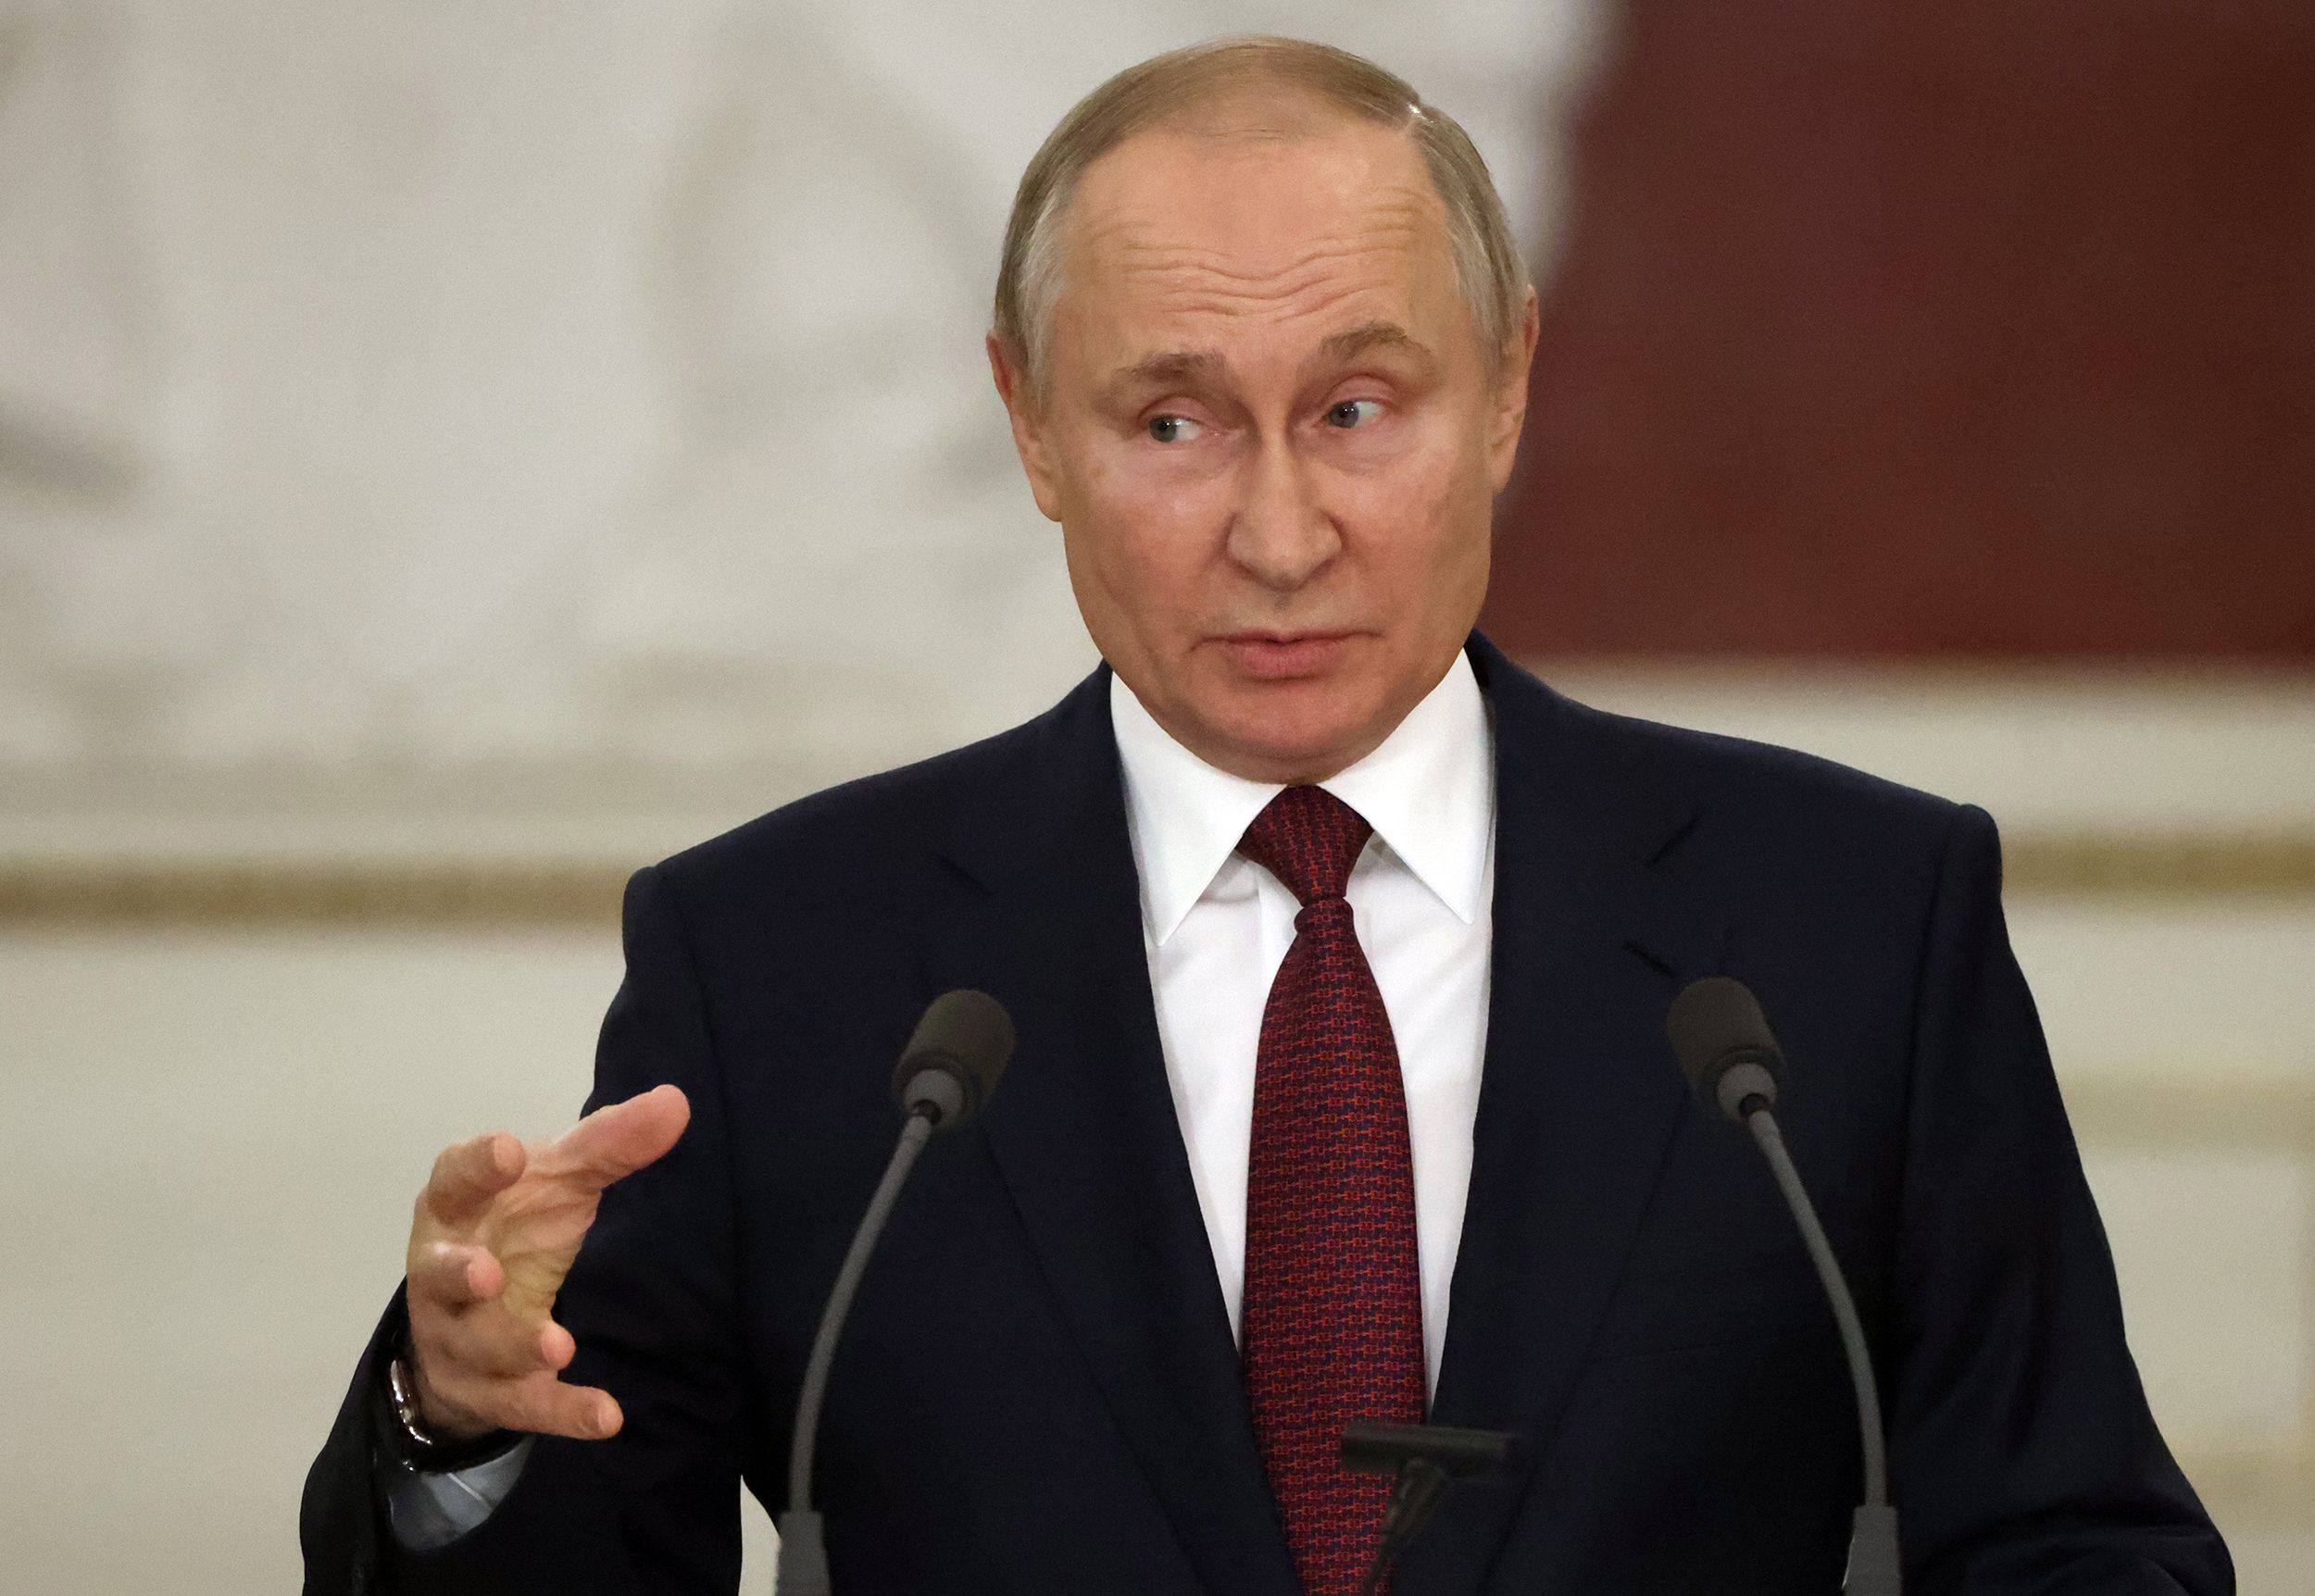 Russia is not currently planning to capture Kharkiv, says Putin